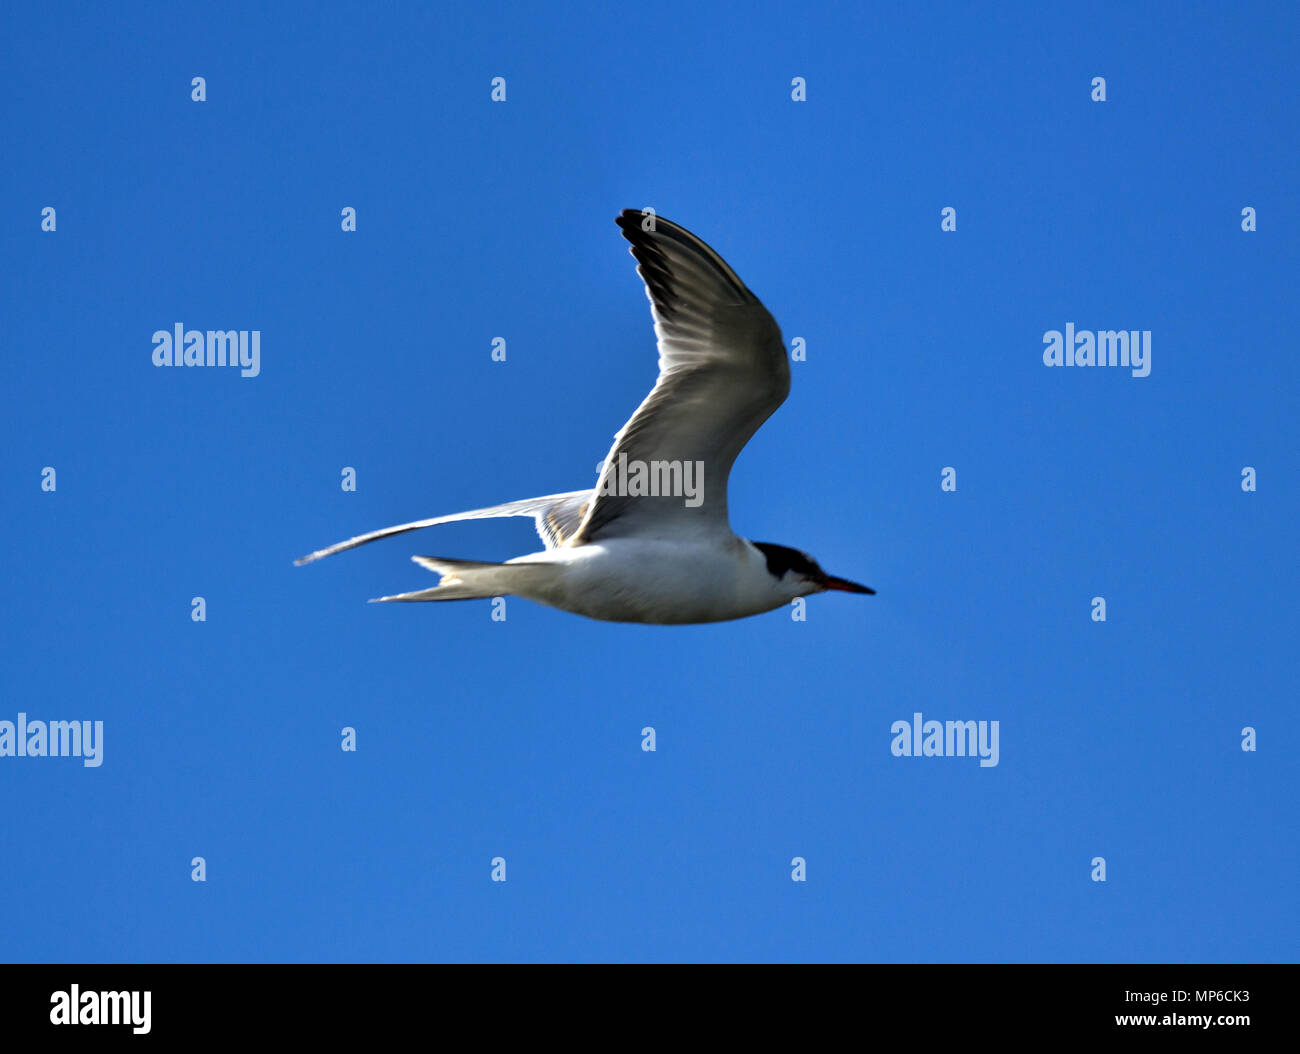 Young river tern (Common Tern, scray, Sterna hirundo) flying, hangs in place like white butterfly. Beauty of flight of birds Stock Photo